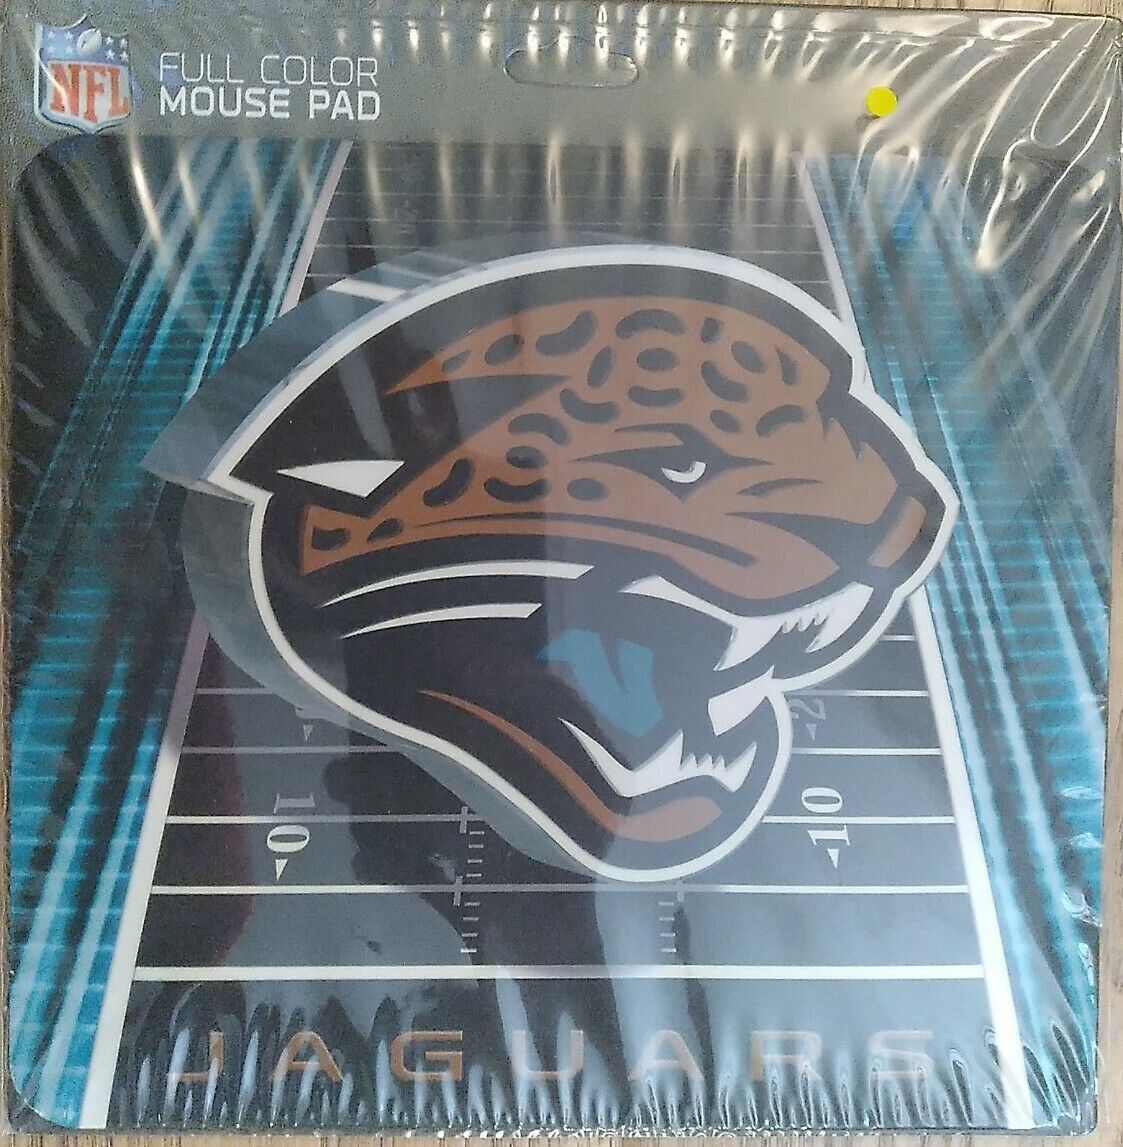 JACKSONVILLE JAGUARS MOUSE PAD 1/8 IN. SPORTS FOOTBALL MOUSEPAD FIELD END ZONE 